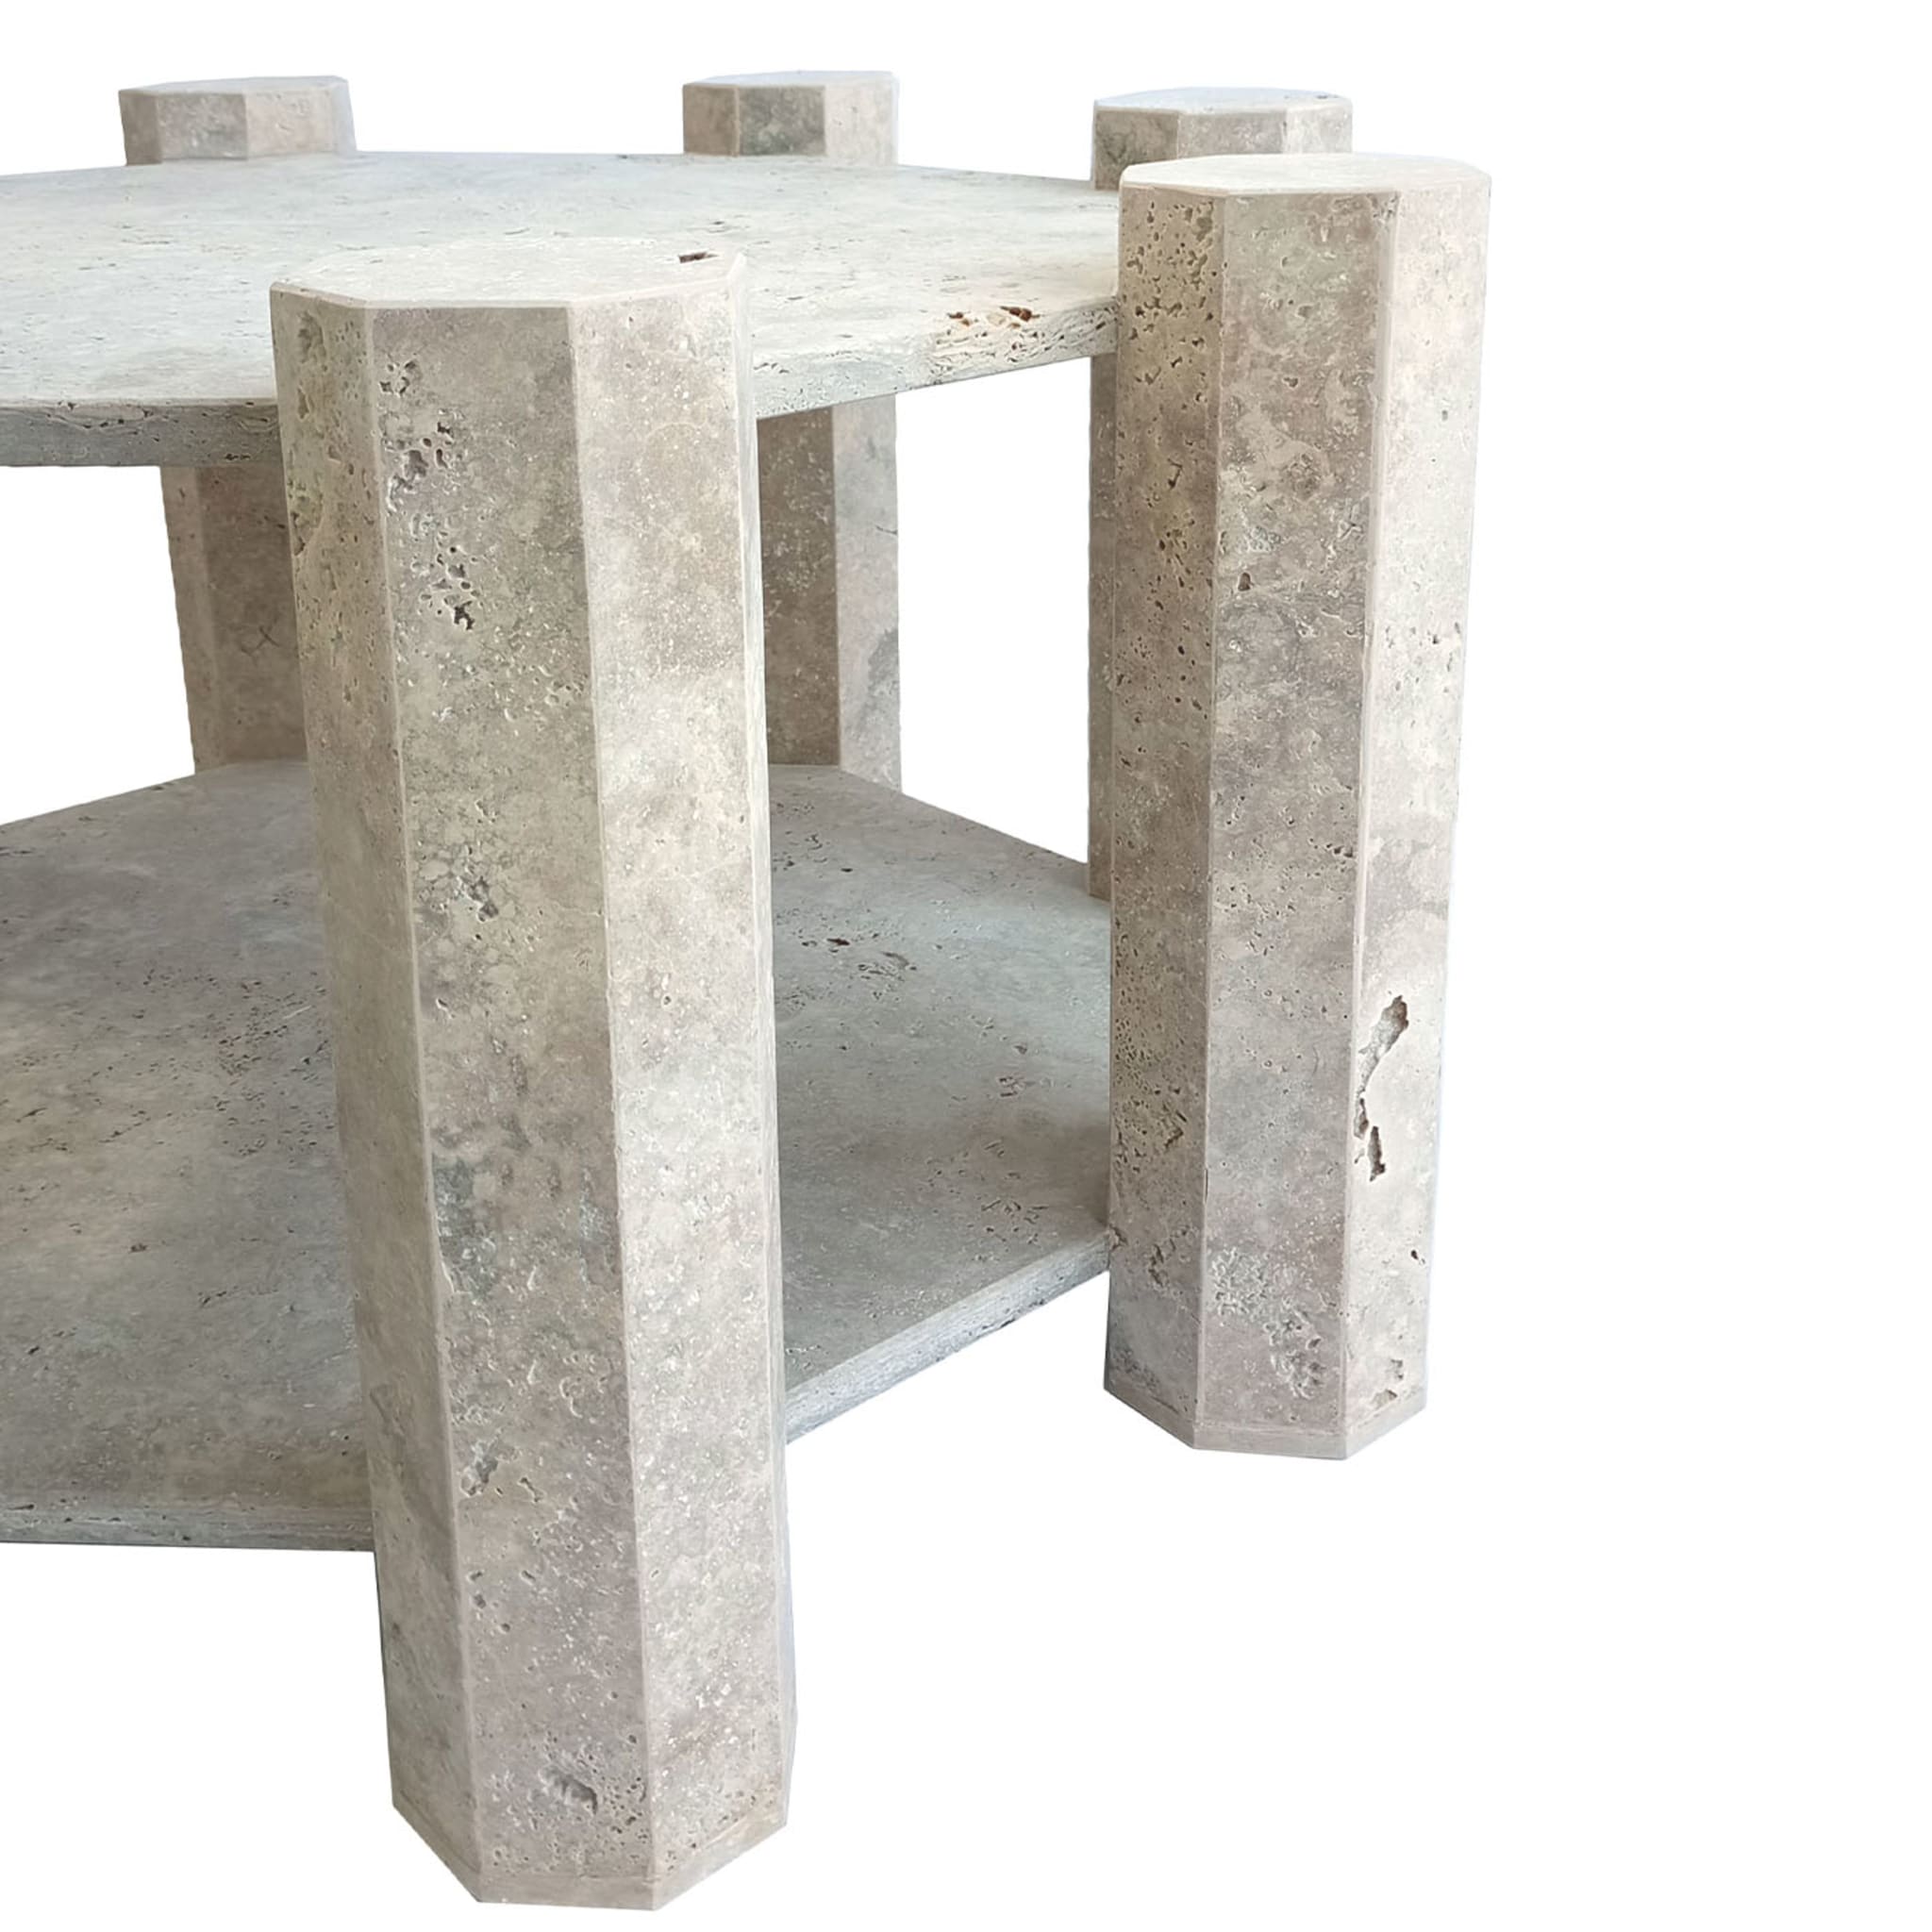 Federico Coffee Table in White Marble By Sissy Daniele - Alternative view 4